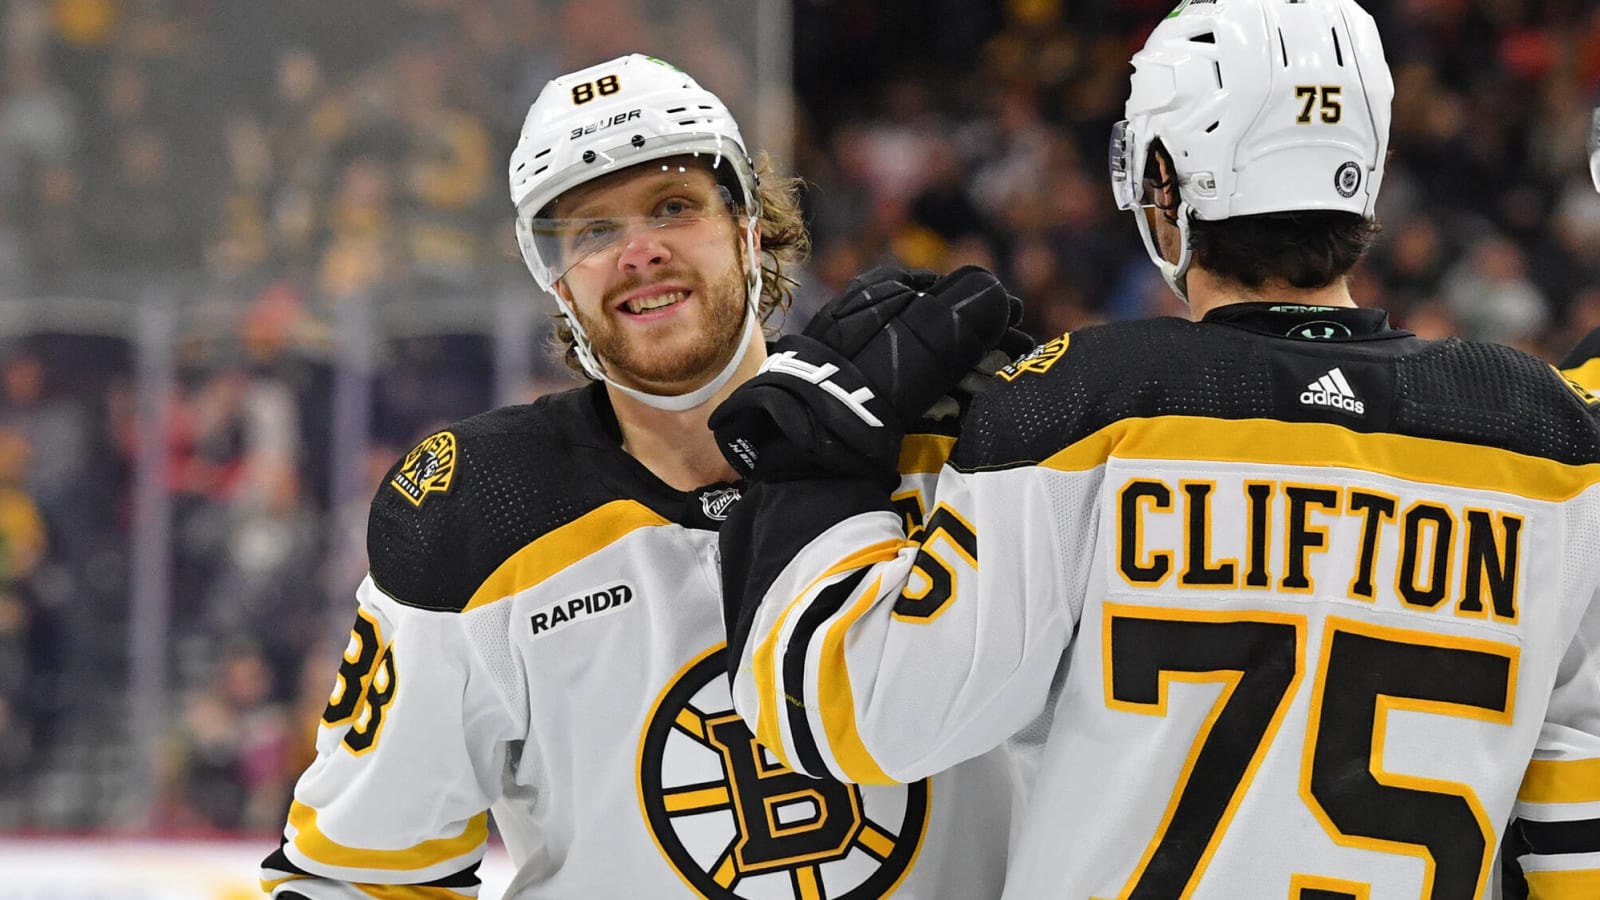 Pastrnak made unique history in Bruins' record-setting win